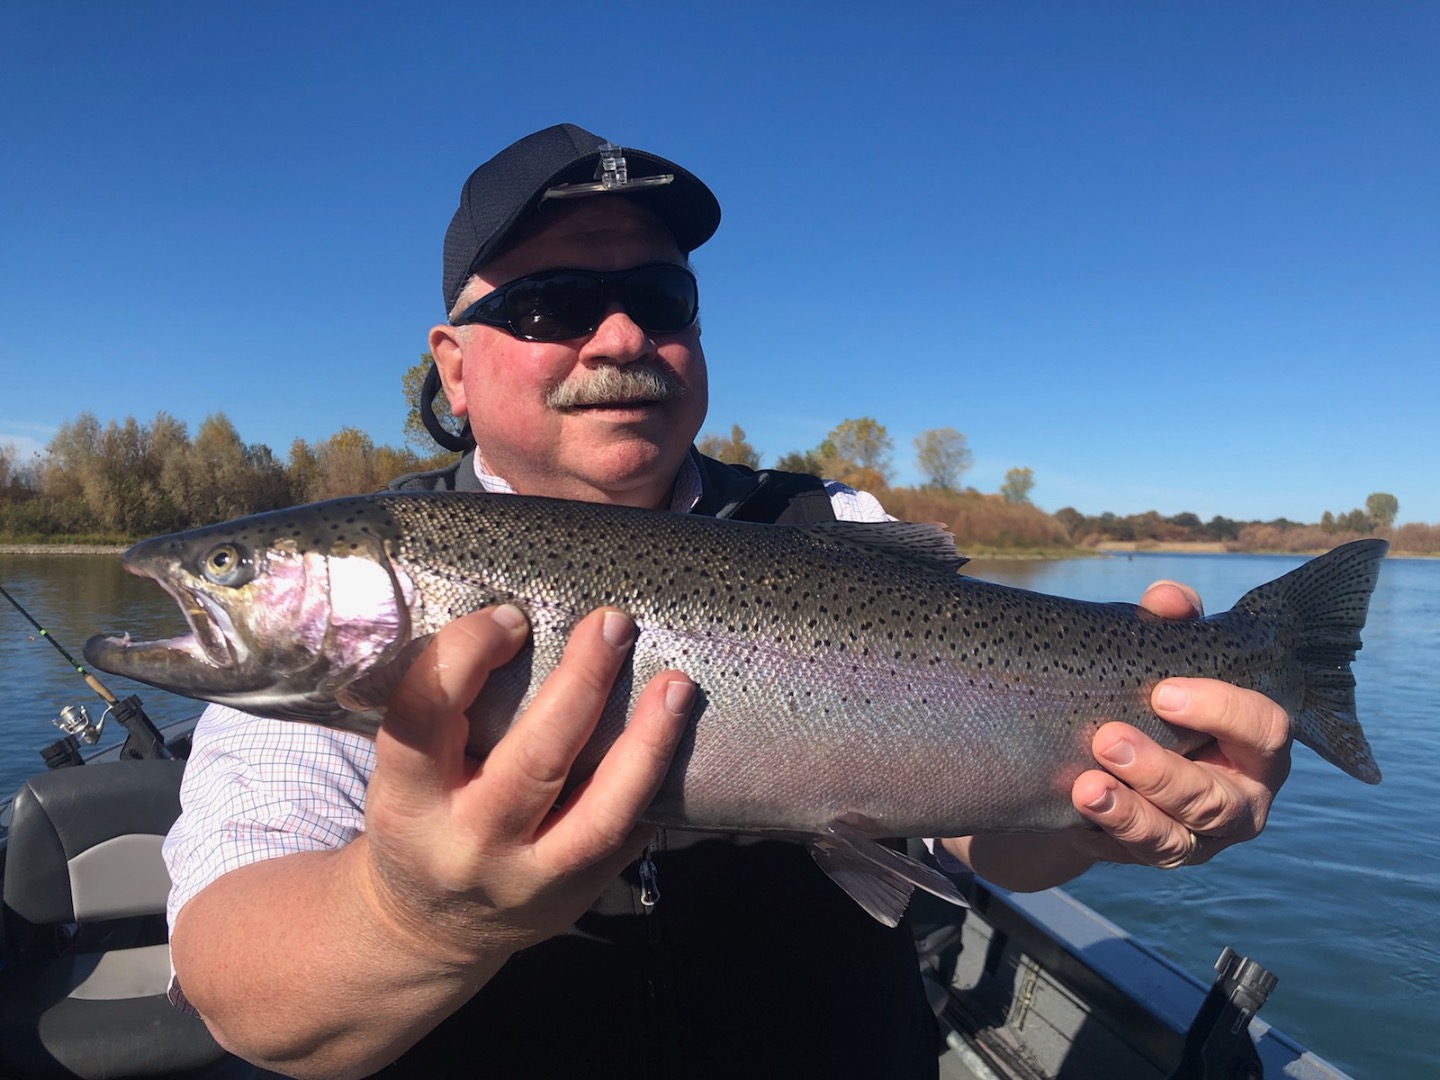 Sac River gives up a good trout bite today!